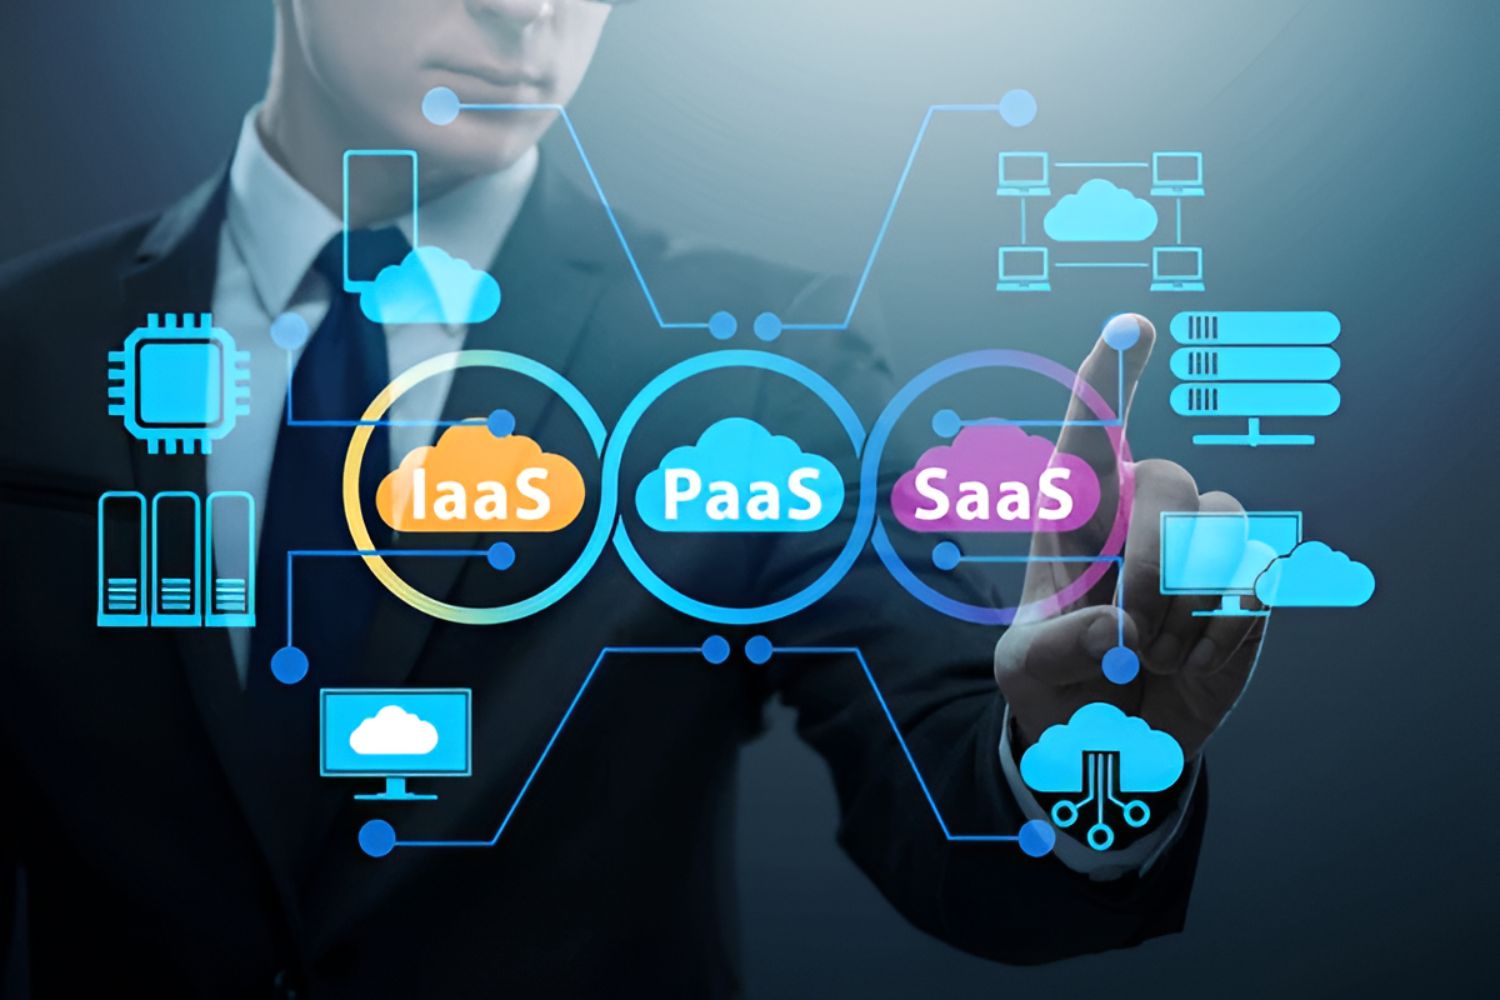 What Are IaaS, PaaS, And SaaS?